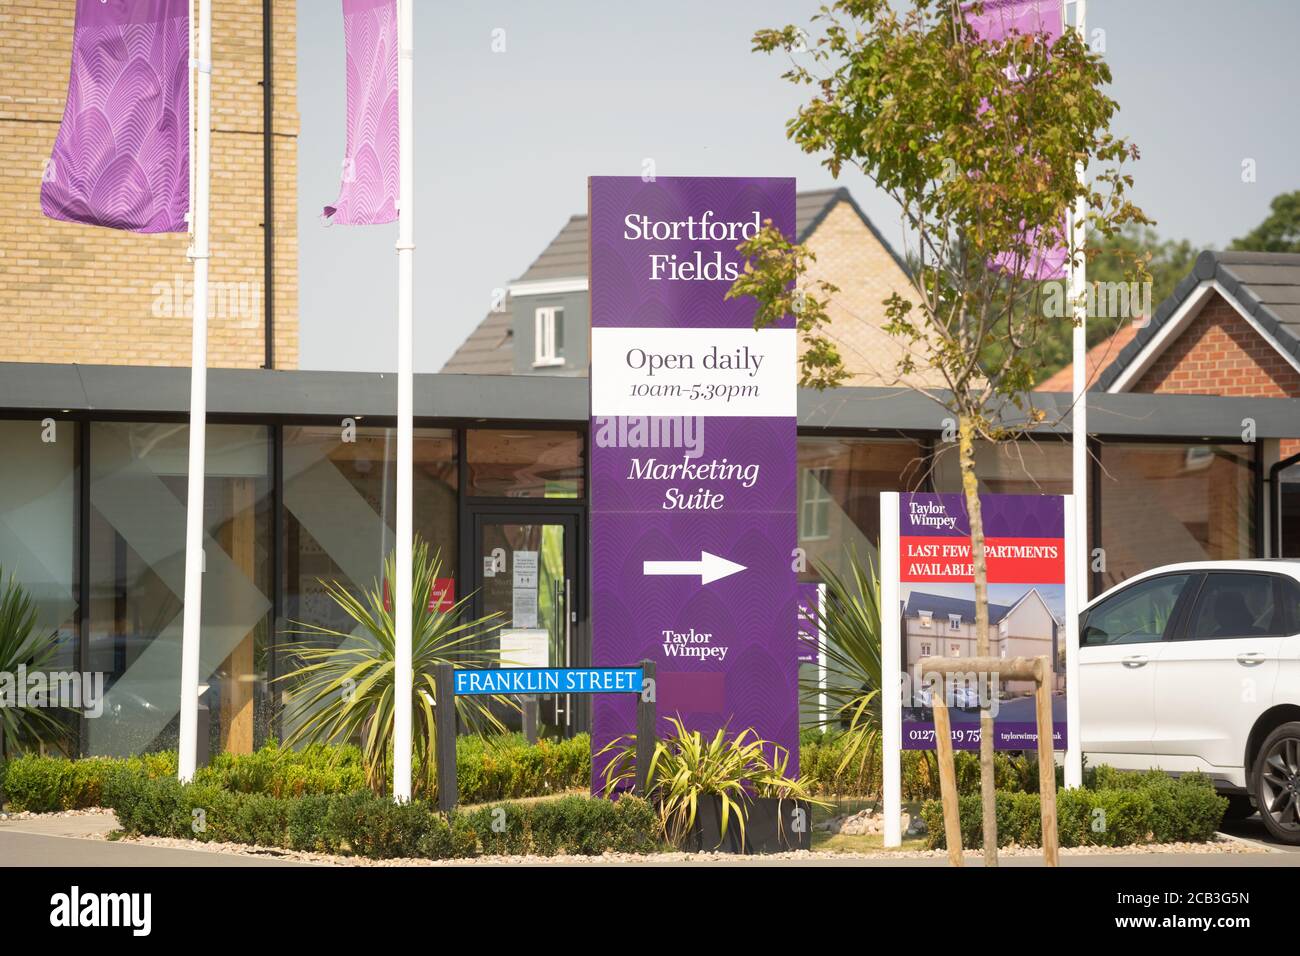 Taylor Wimpey Sales and Marketing Suite at the new Stortford Fields housing estate development. Stock Photo